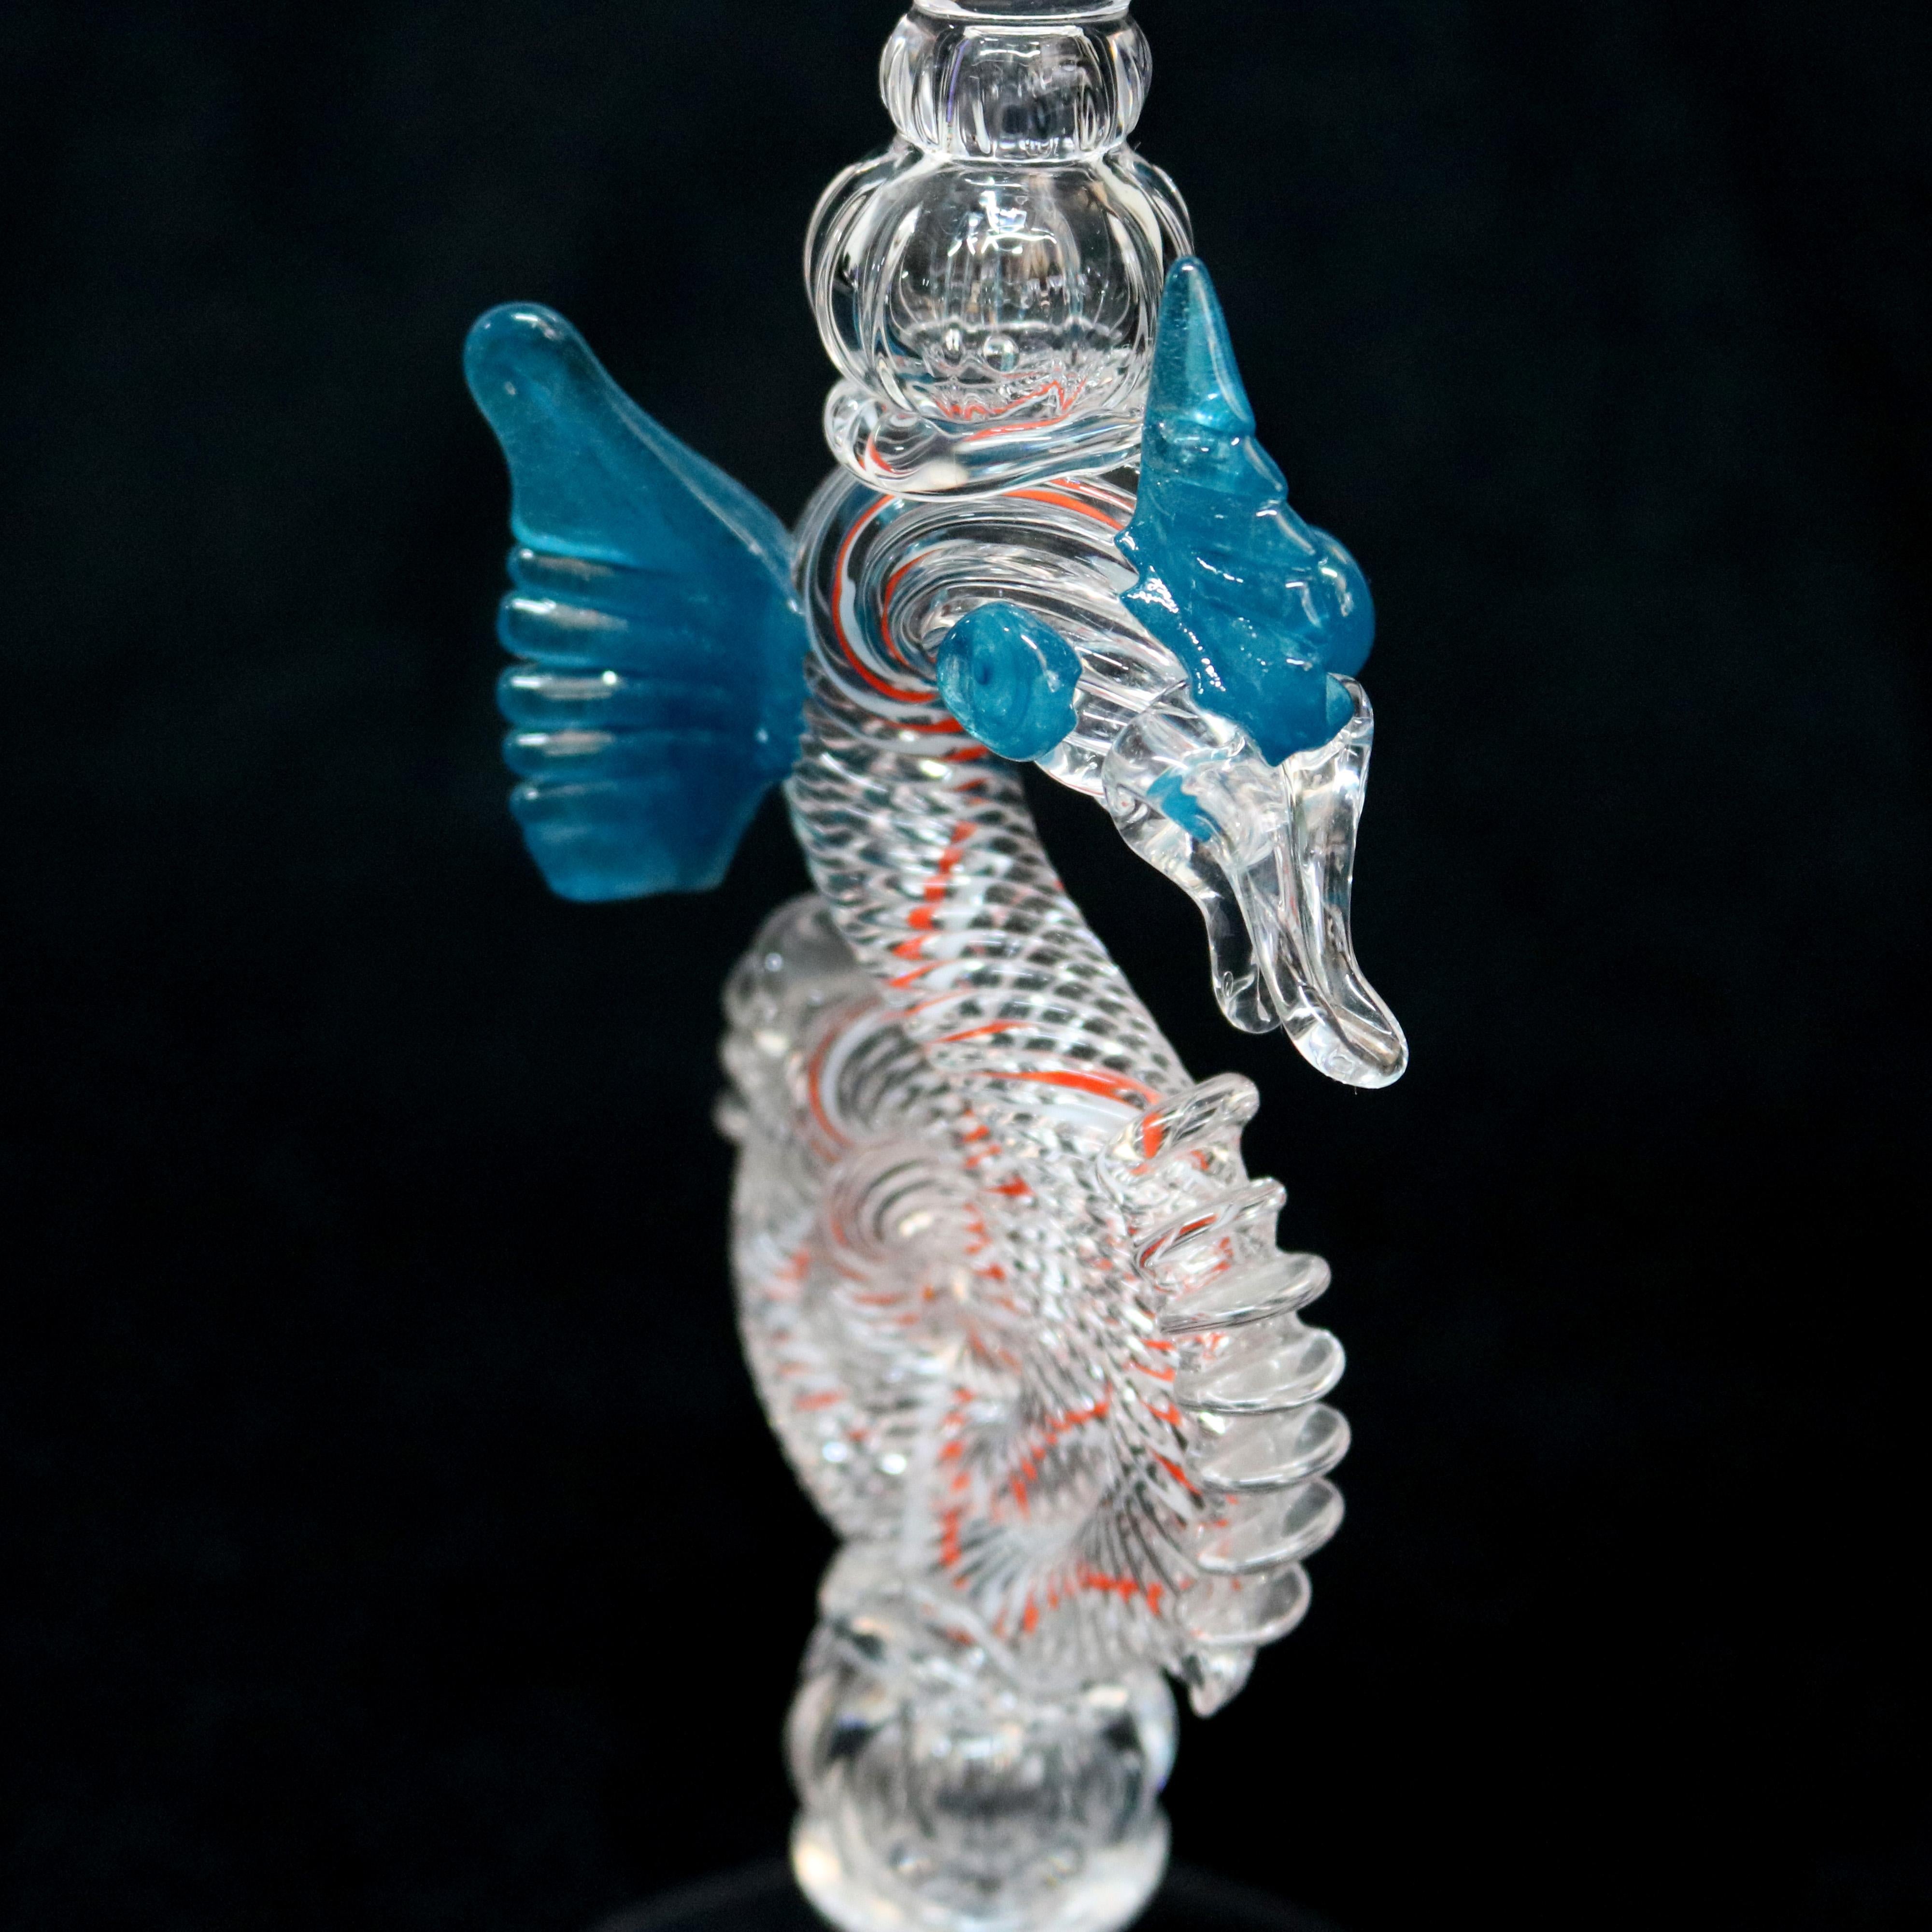 Steuben Venetian style Dragonglass wine goblet by William Gudenrath features cylindrical bowl surmounting peppermint seahorse with cobalt blue wings, signed and dated on base, circa 2000

Measures: 11